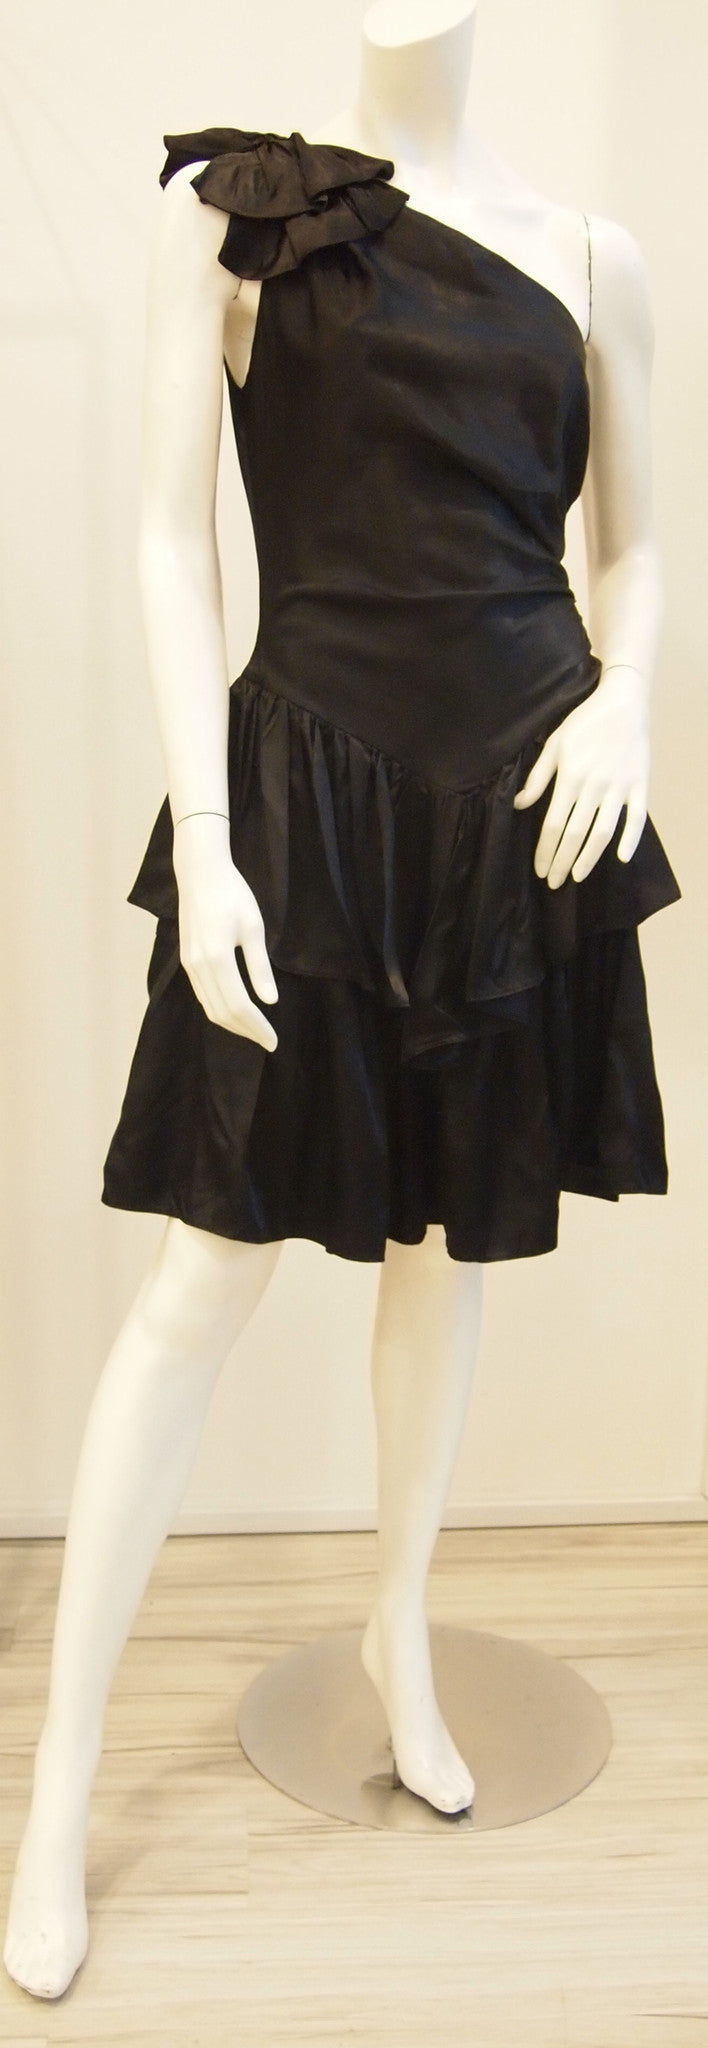 Midnight Black Toga Tiered Vintage Party Dress